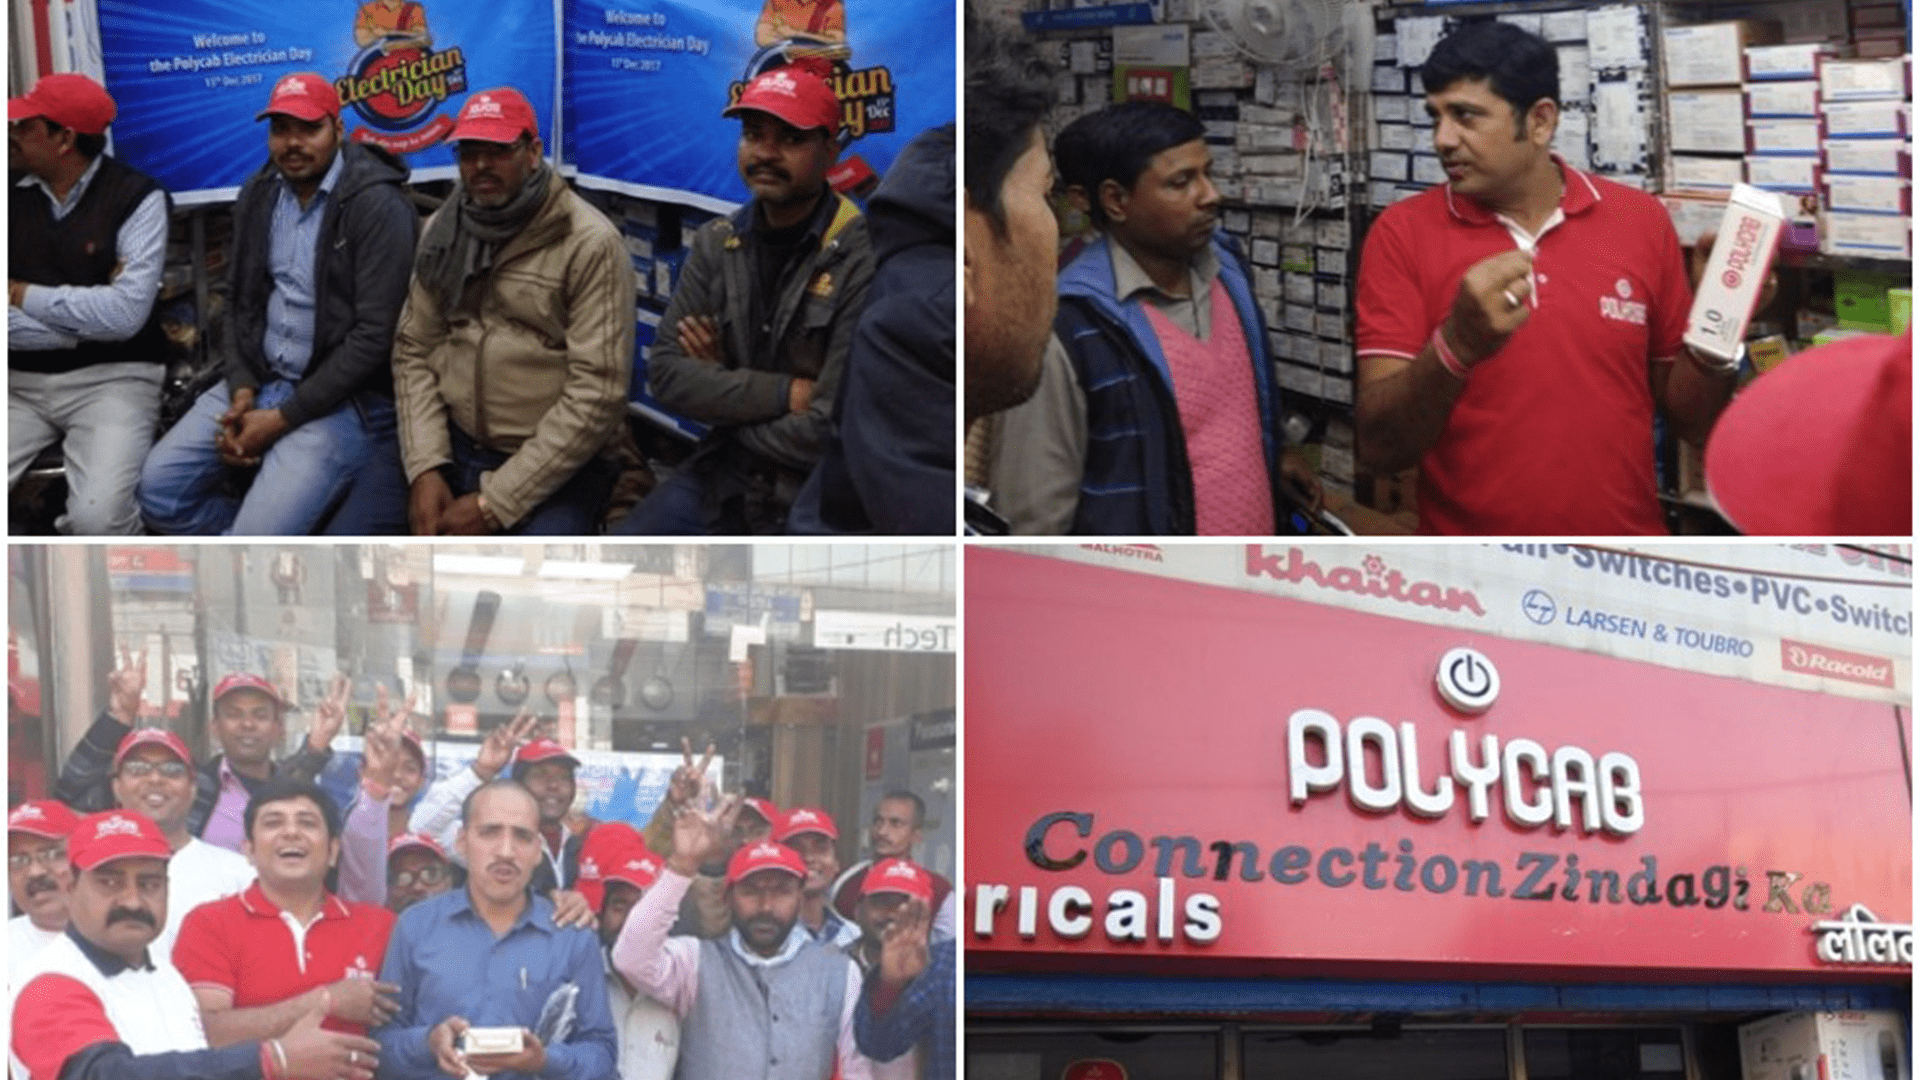 Polycab events celebrated electrician day across the country